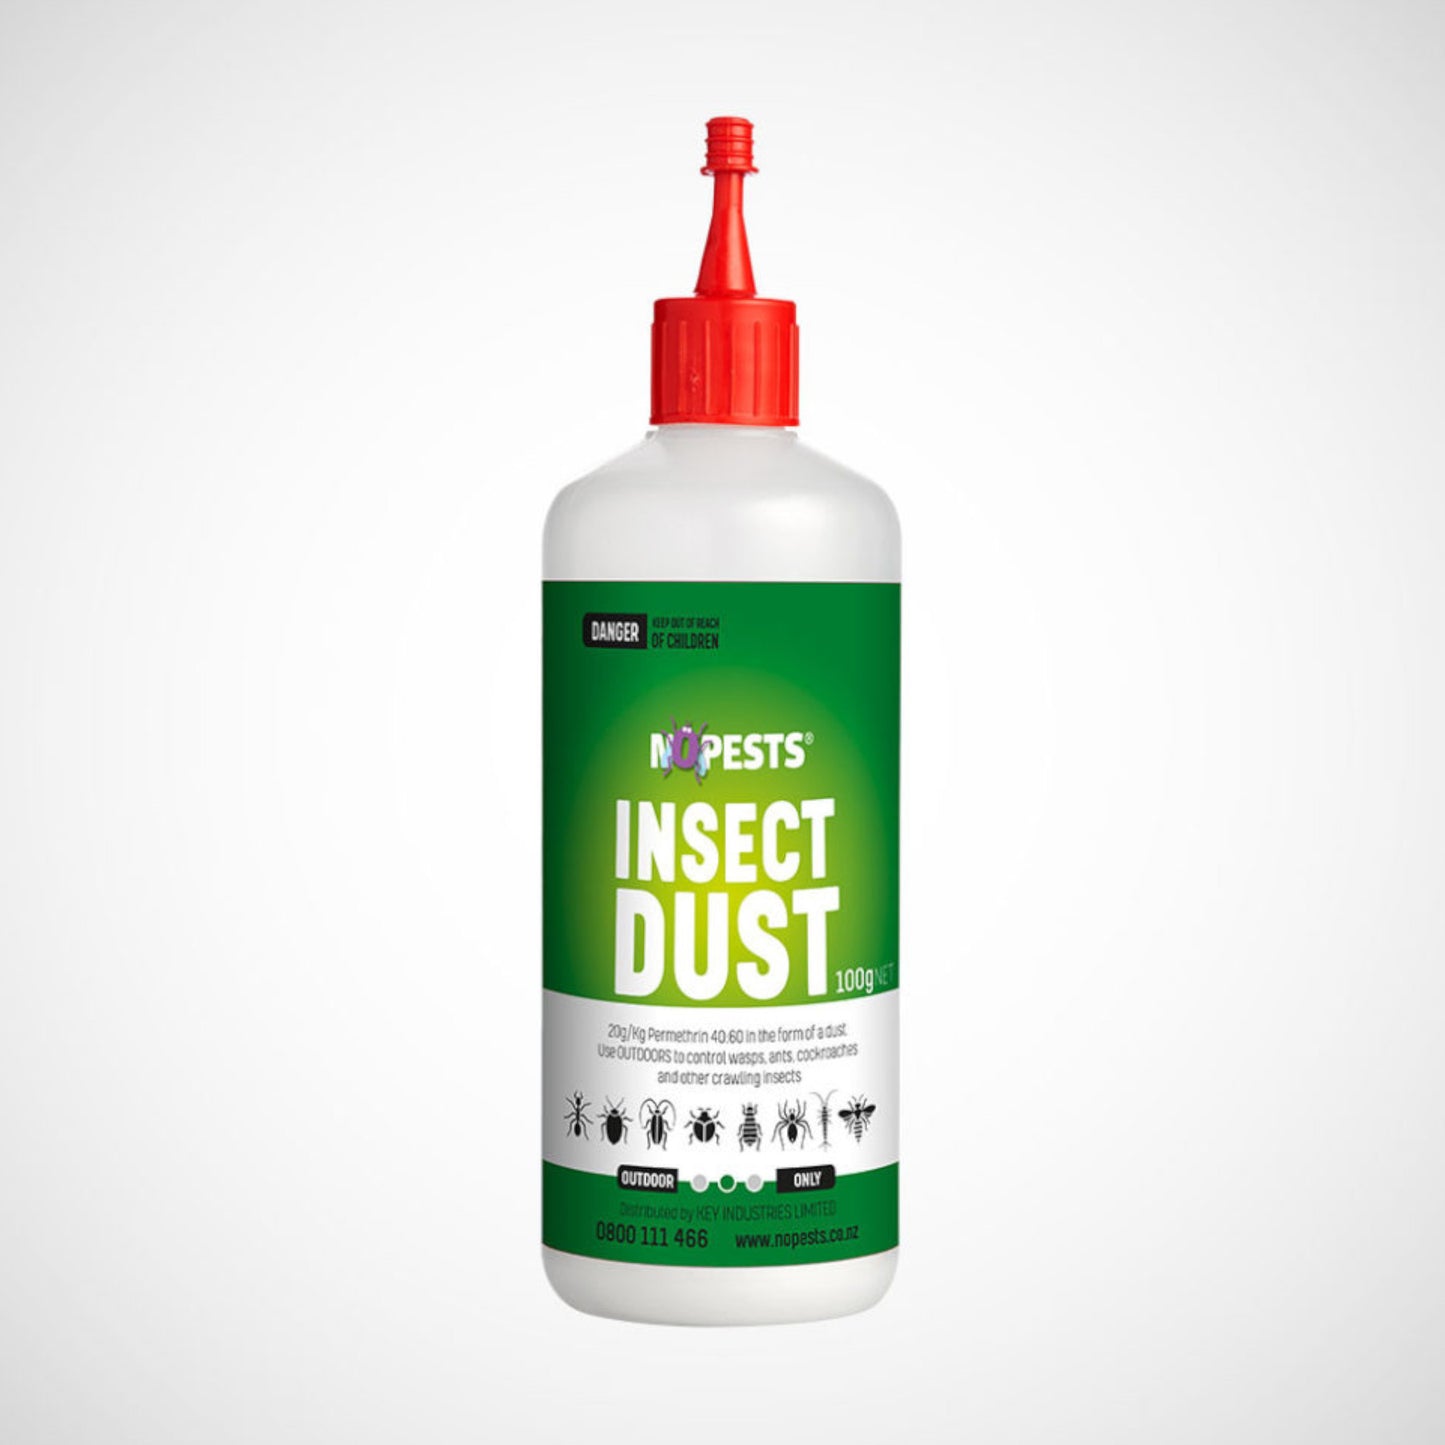 NoPests® Insect Dust 100gm